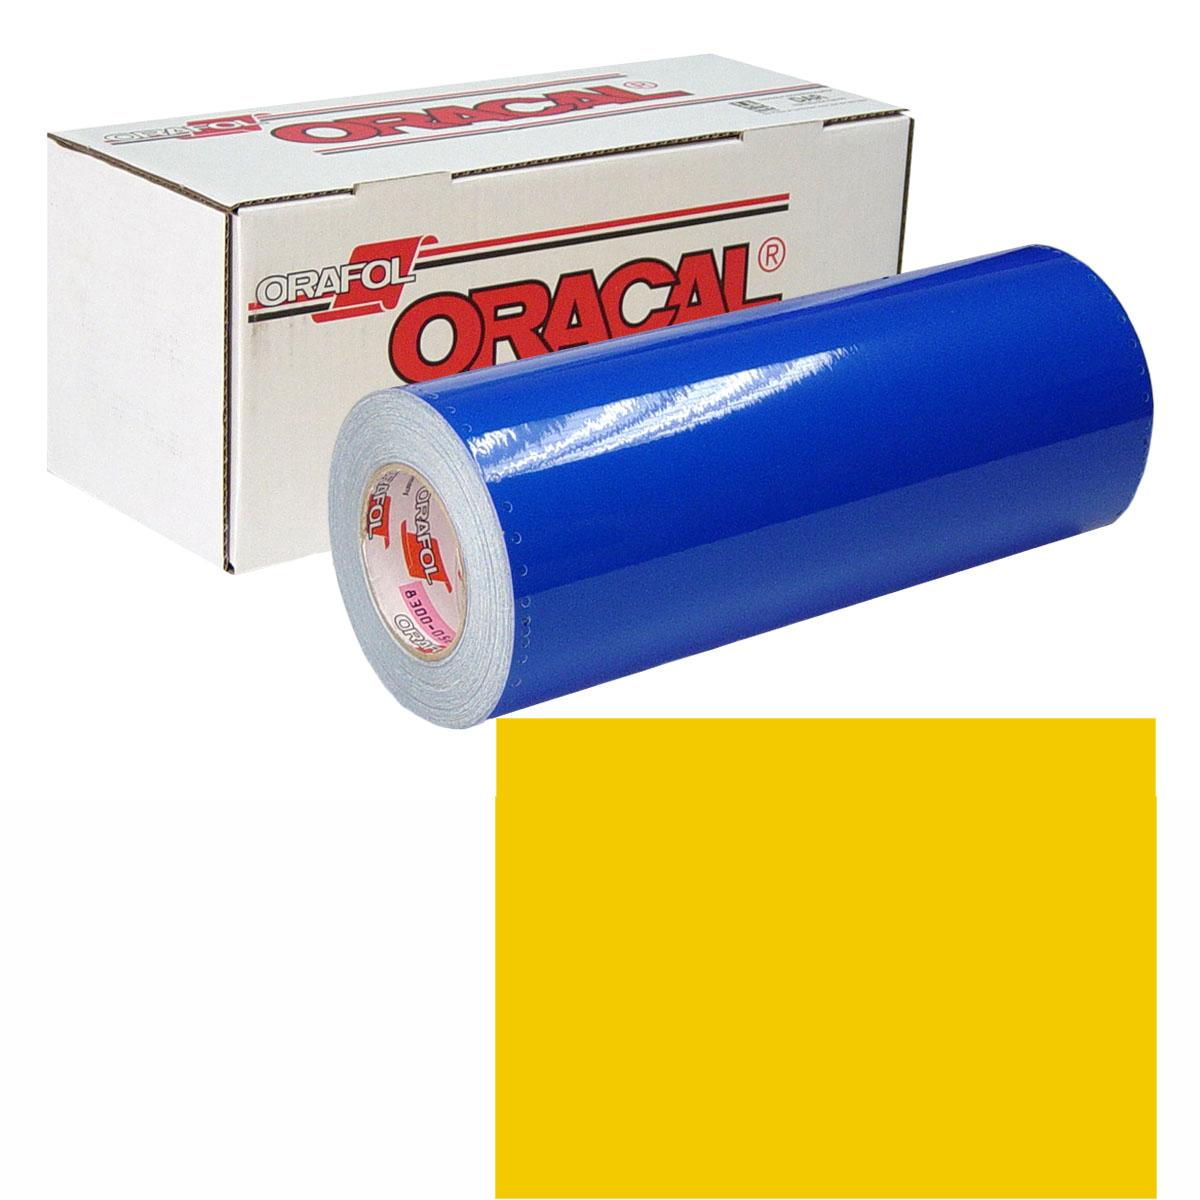 ORACAL 631 30in X 10yd 022 Light Yellow